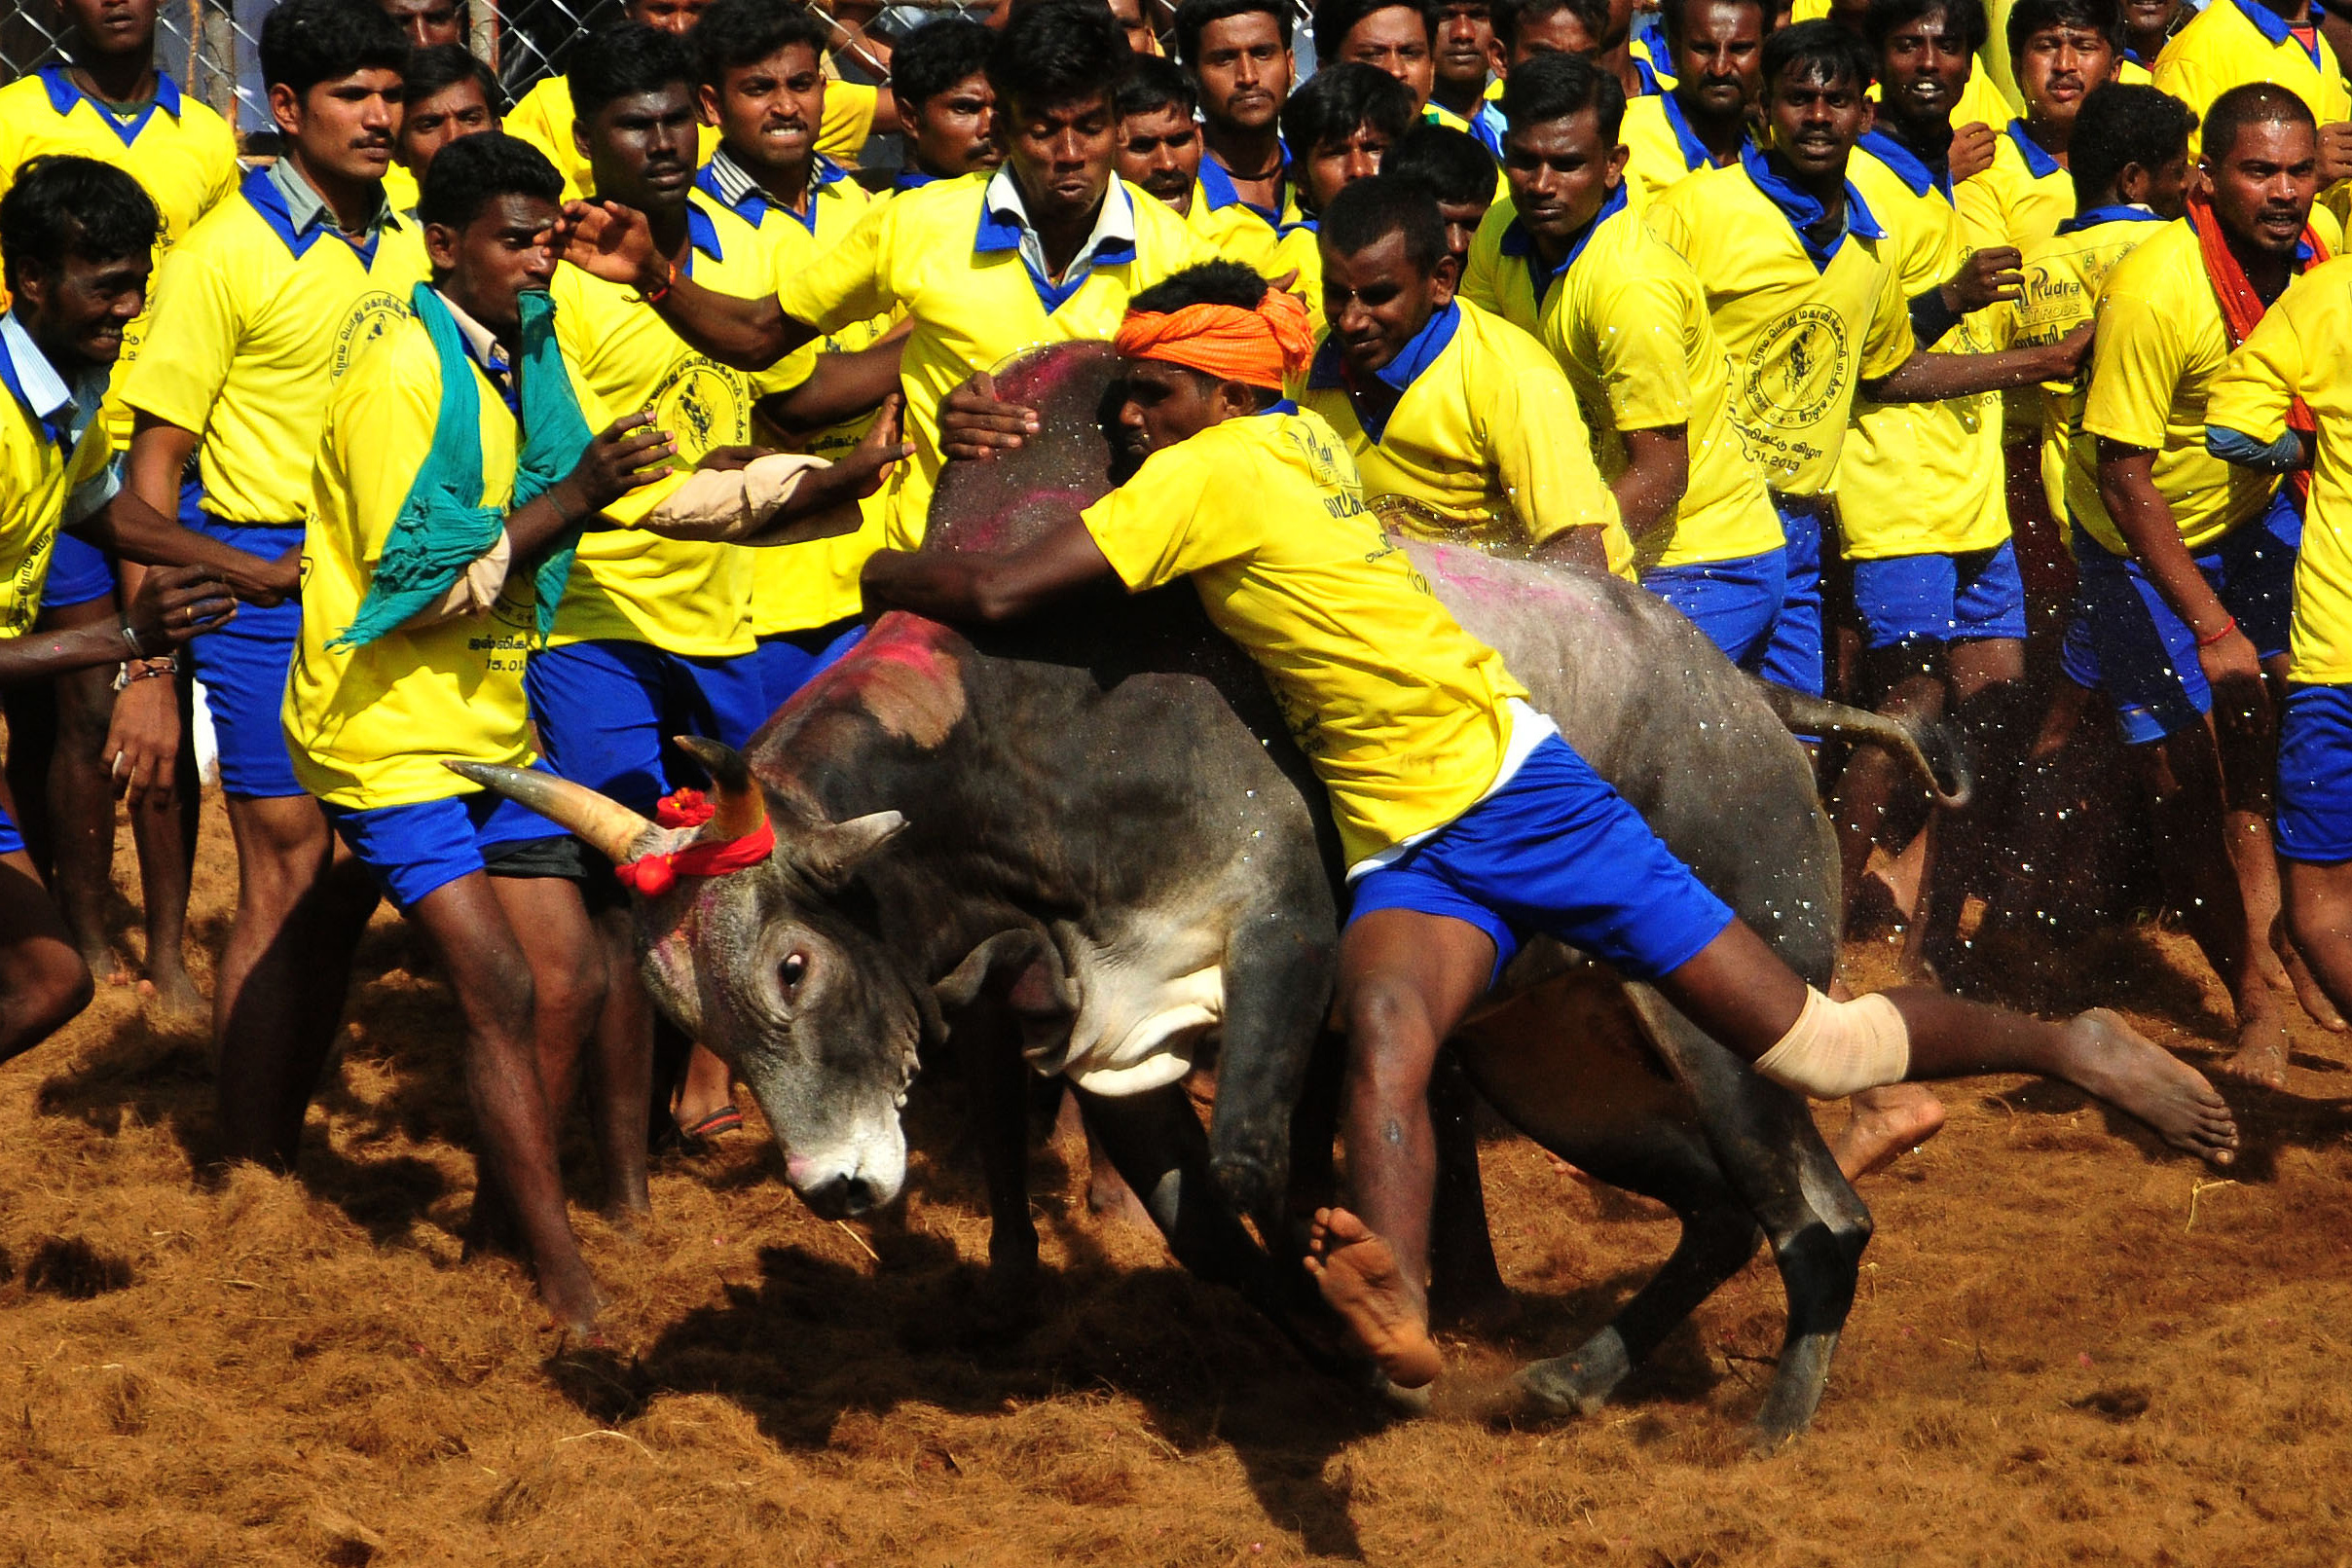 Participants attempt to hold down a bull during the traditional bull taming festival called 'Jallikattu' in Palamedu near Madurai, Jan. 15, 2013 (STRDEL—AFP/Getty Images)